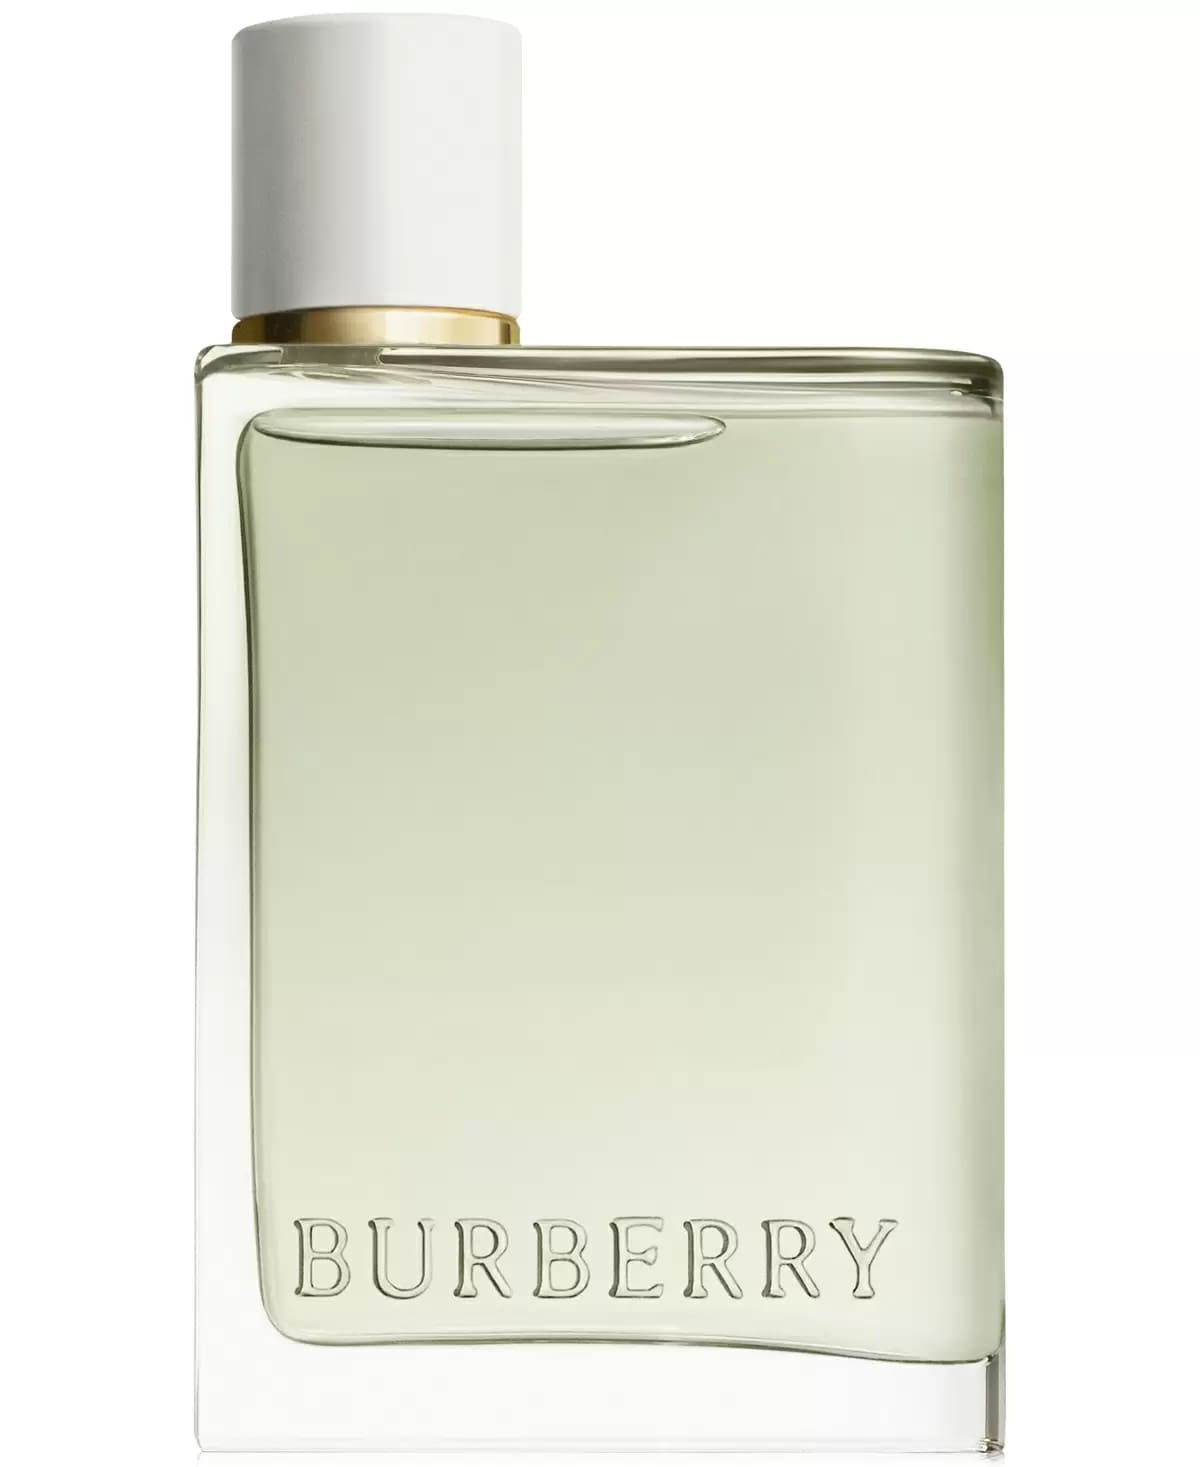 Burberry Her EDT Spray Perfume for Women by Burberry